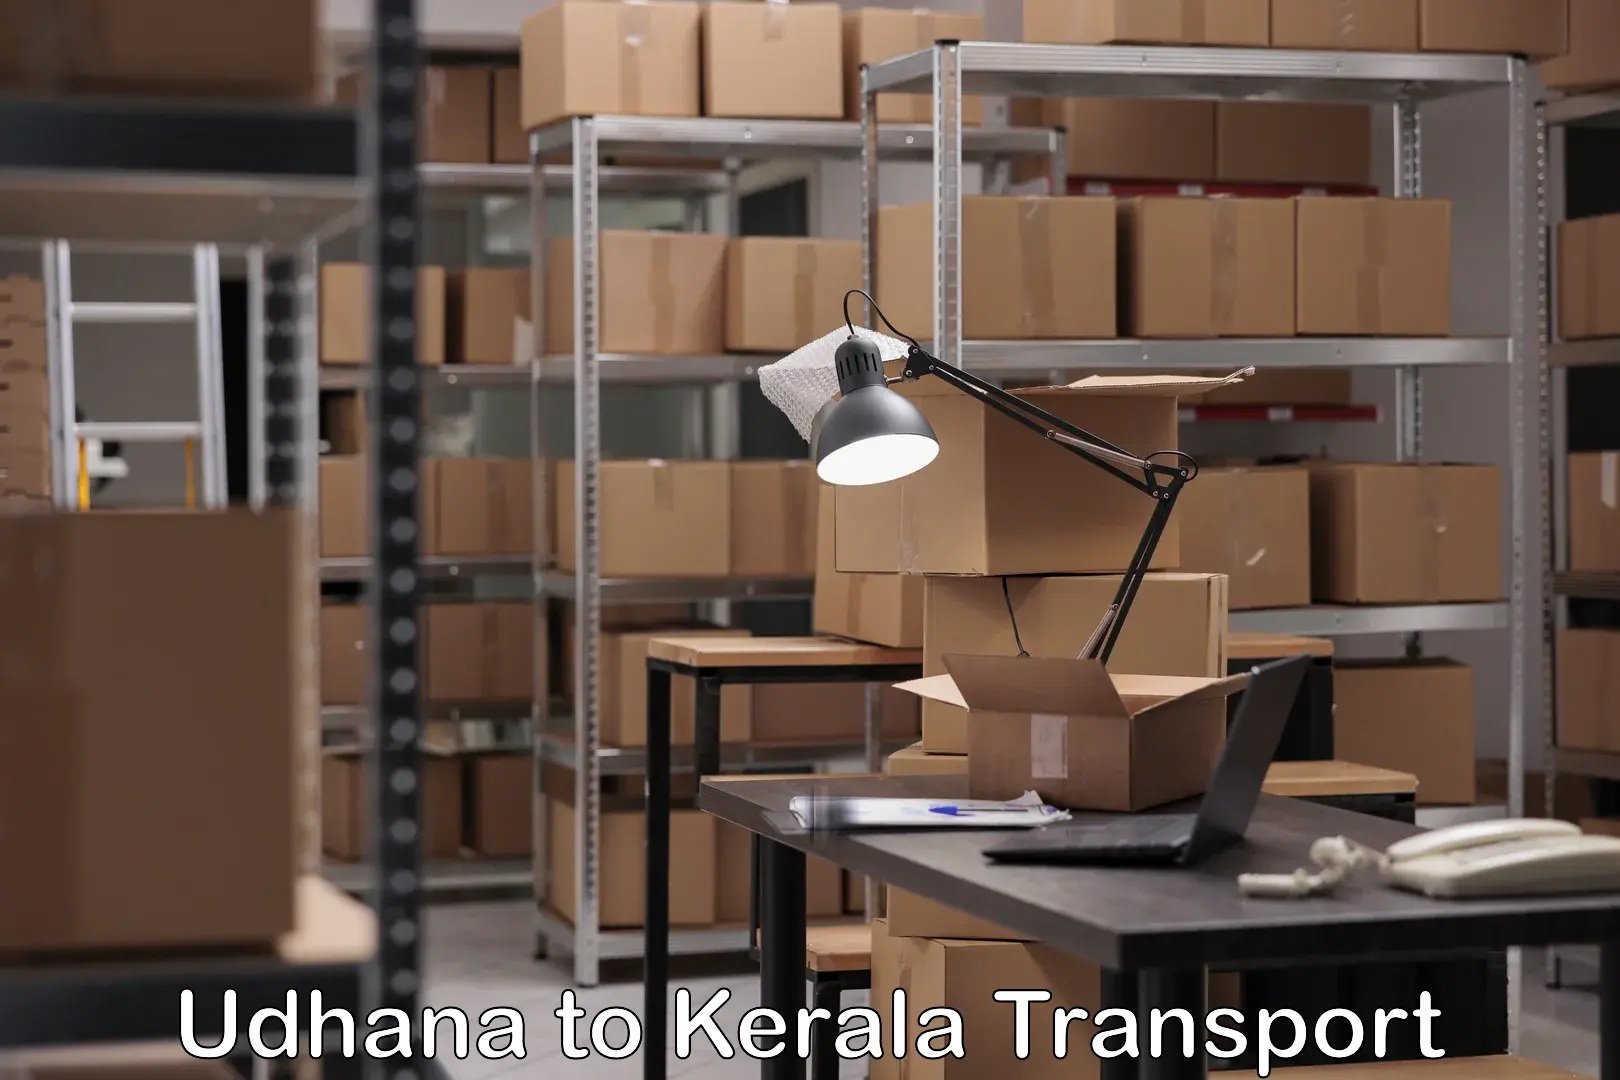 Delivery service Udhana to Kerala